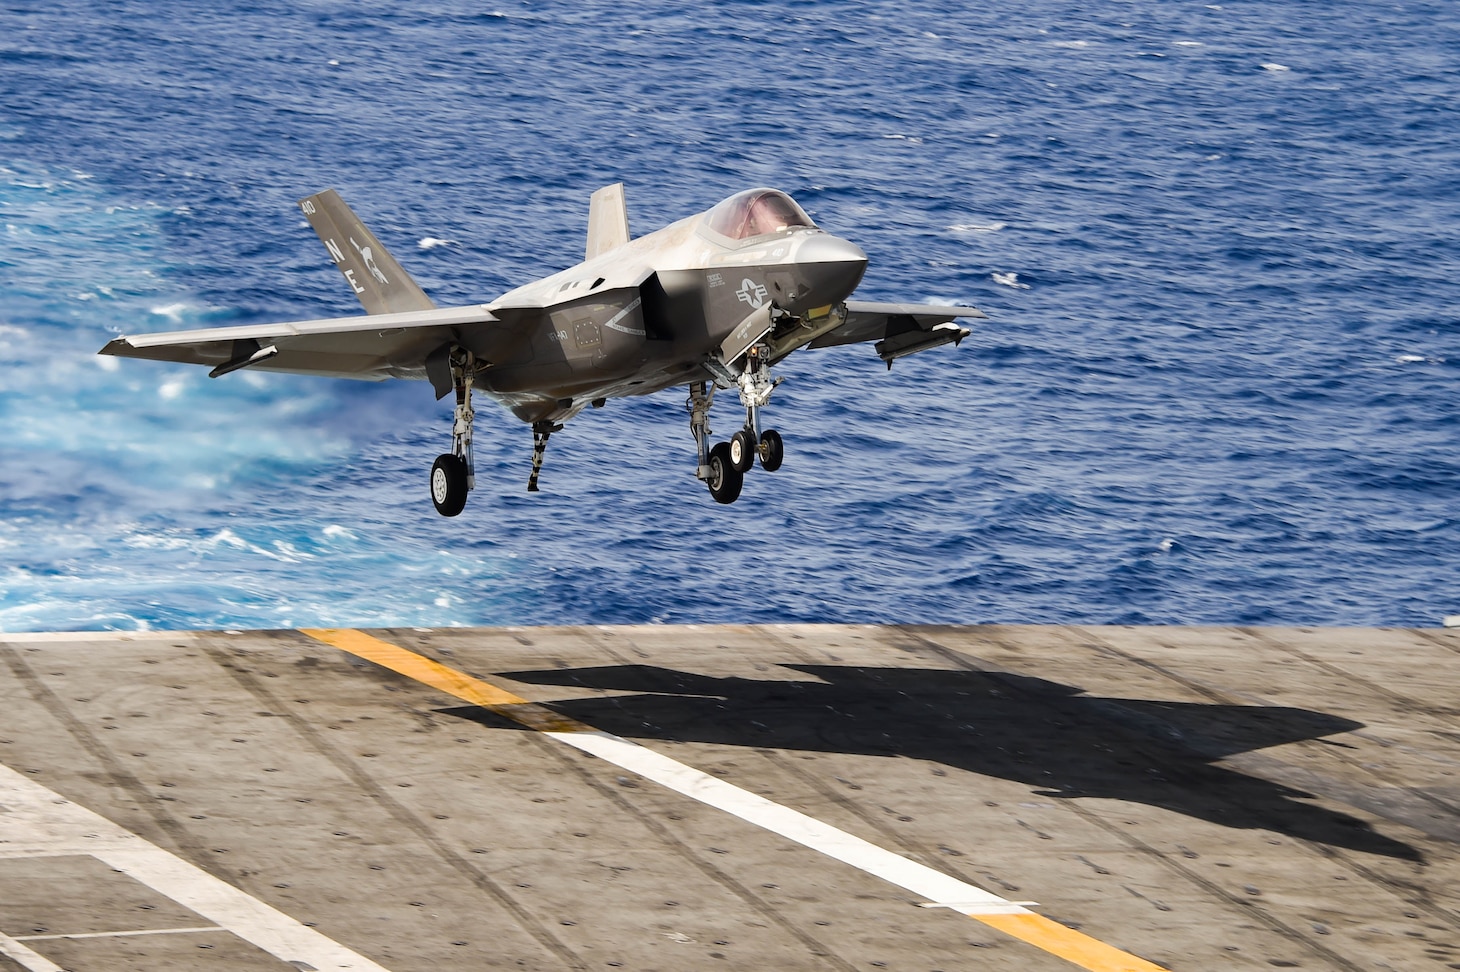 An F-35C Lightning II, assigned to the “Argonauts” of Strike Fighter Squadron (VFA) 147, recovers on the flight deck of Nimitz-class aircraft carrier USS Carl Vinson (CVN 70), Dec. 30, 2021.